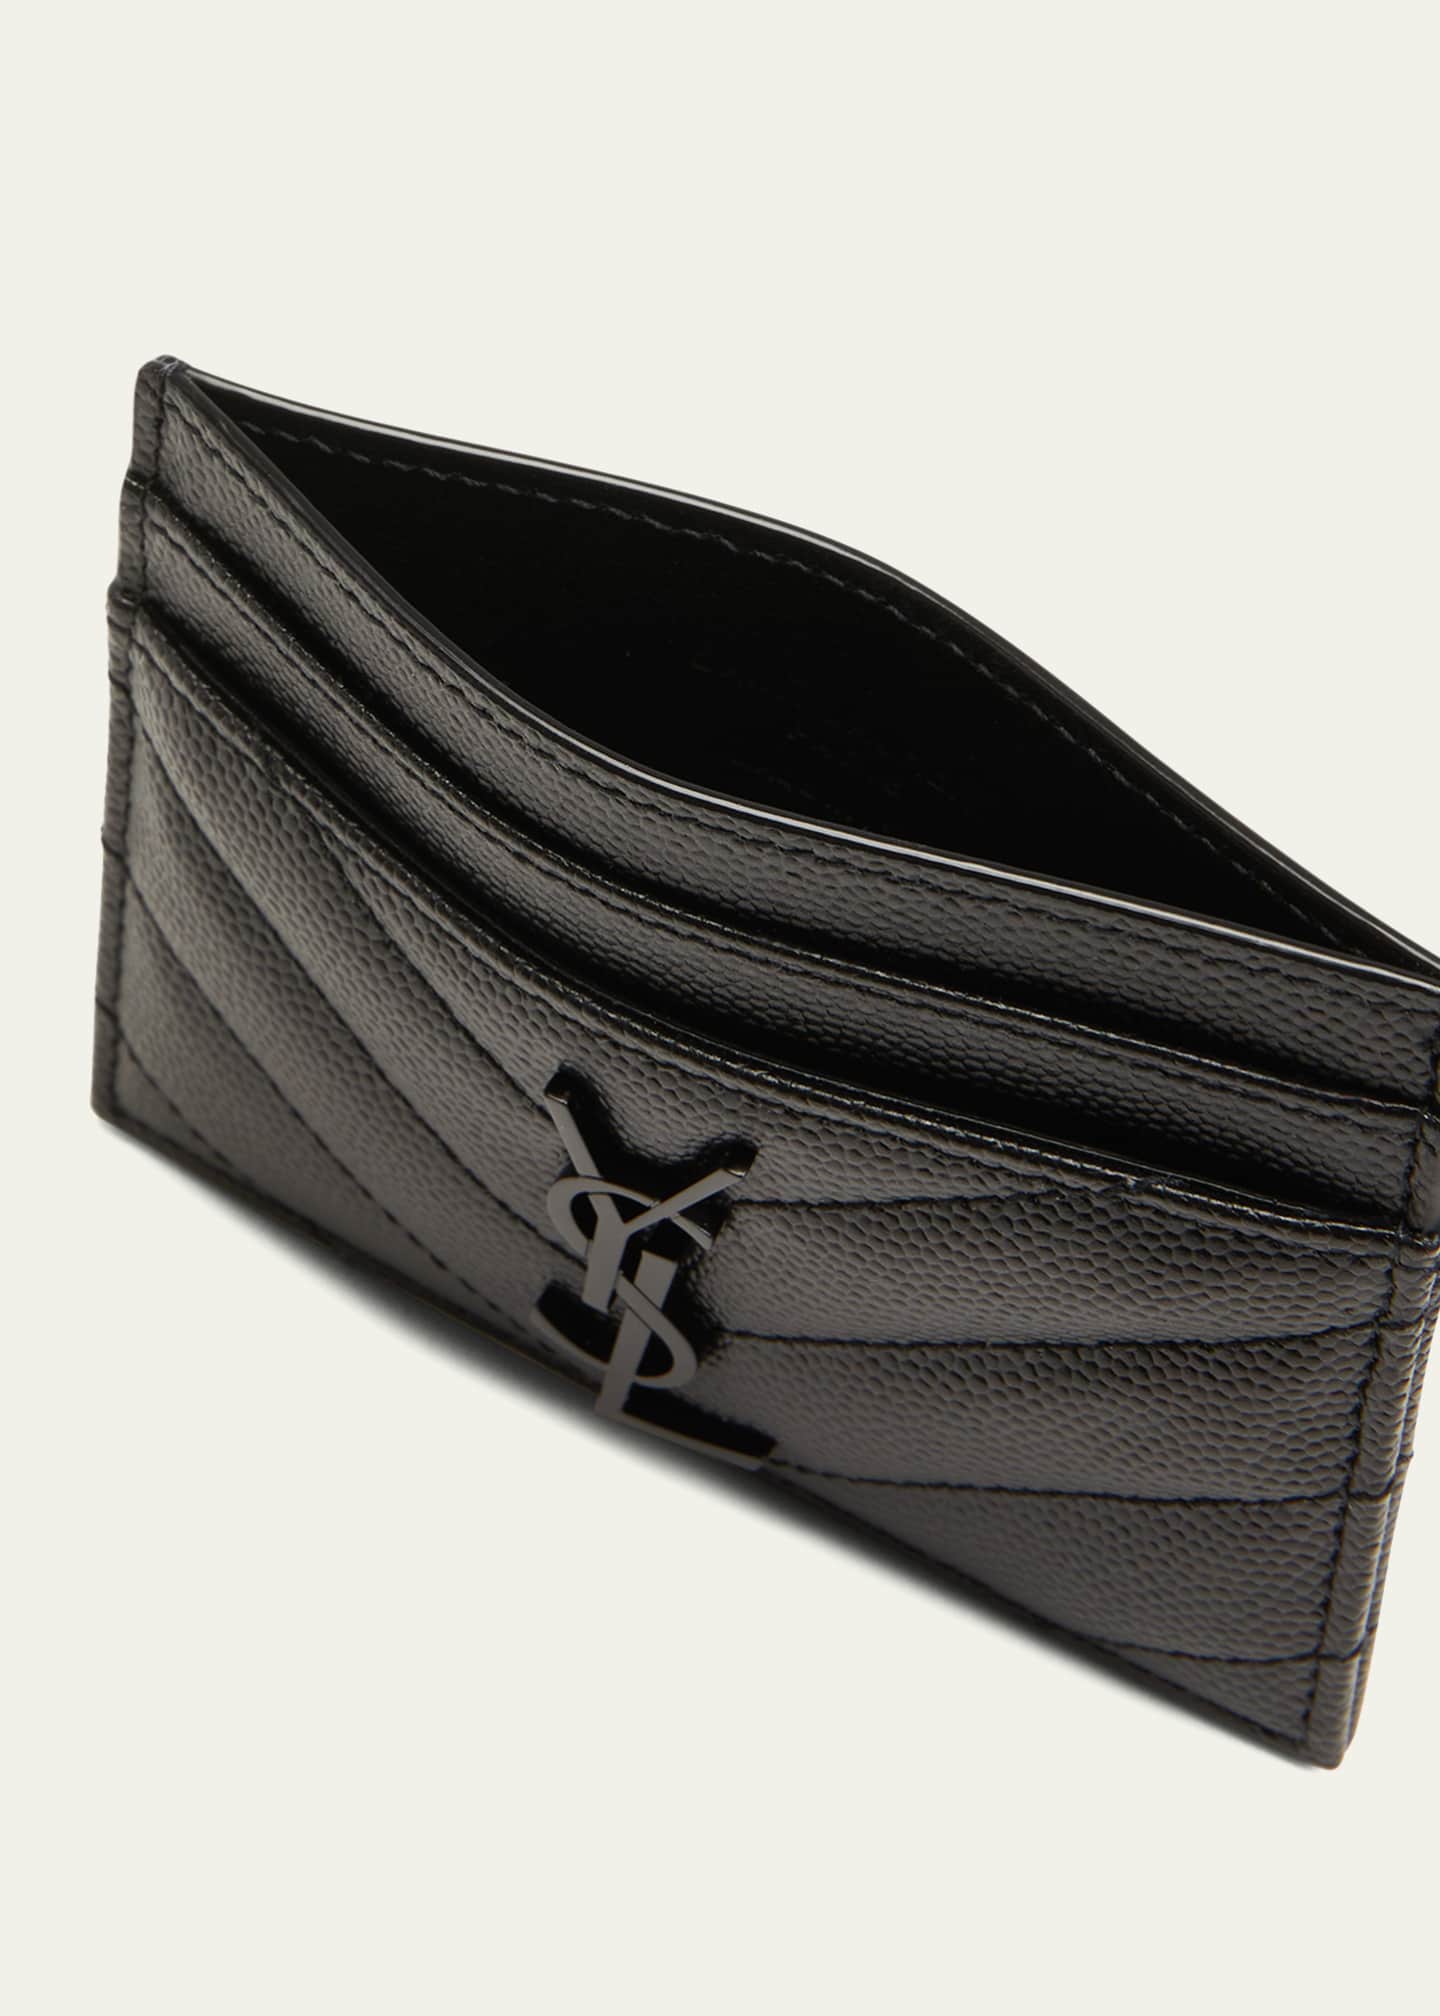 Saint Laurent YSL Monogram Card Case in Grained Leather Image 4 of 4